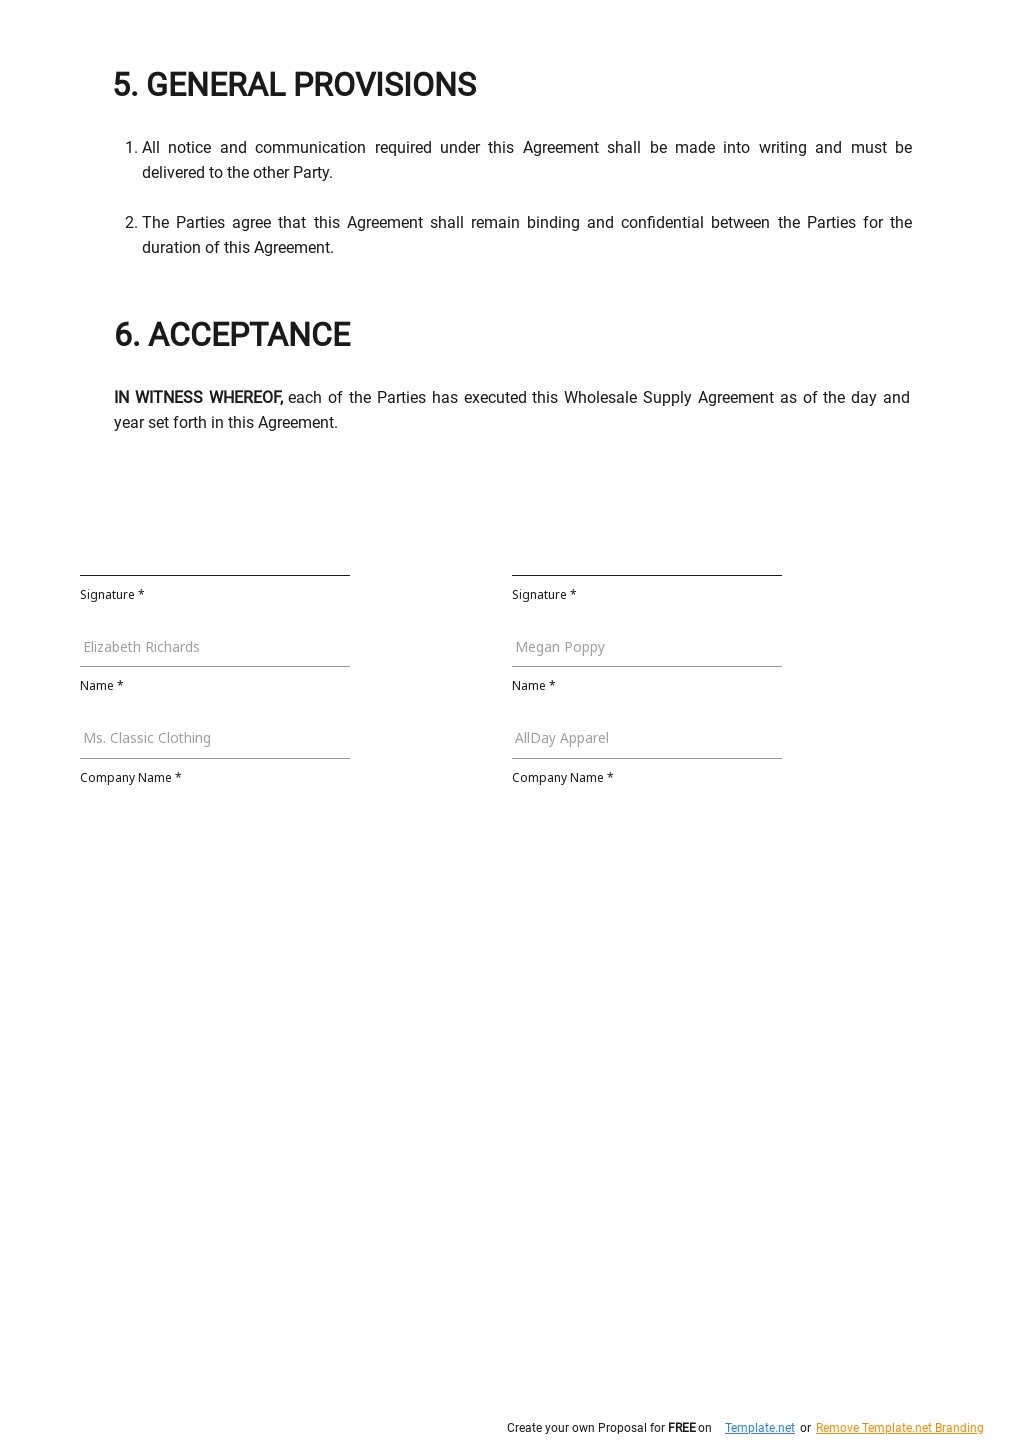 Wholesale Supply Agreement Template  2.jpe